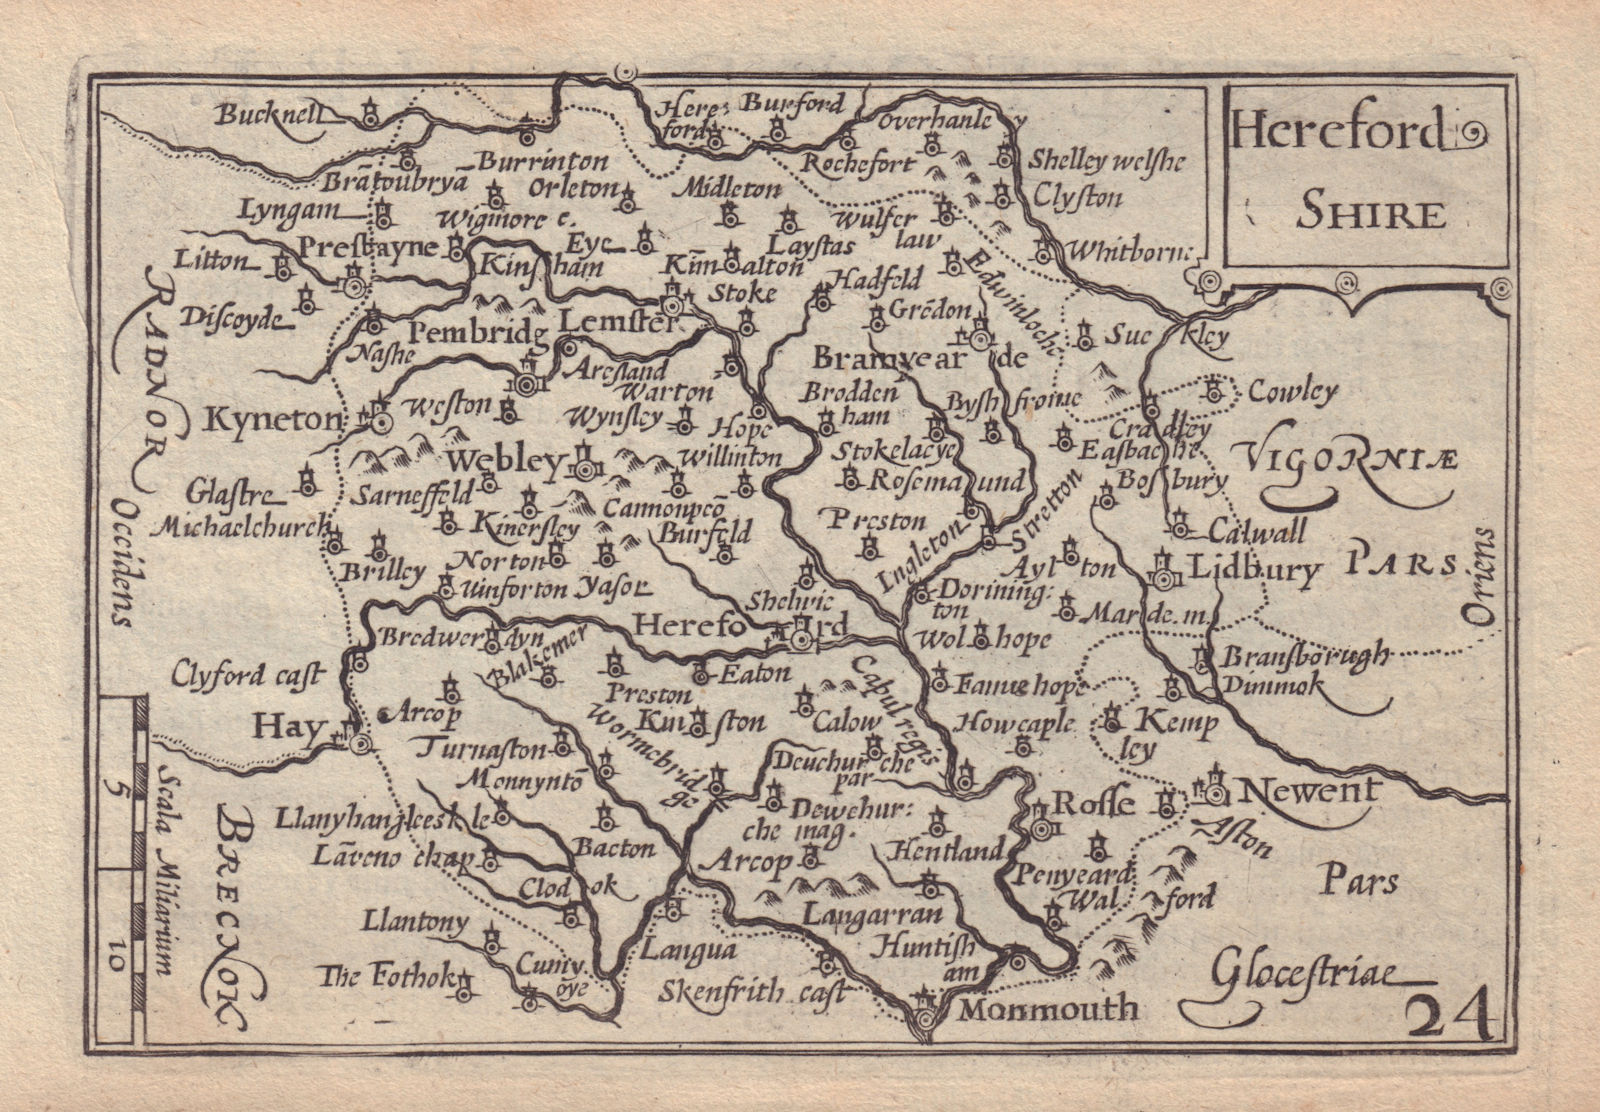 Hereford Shire by van den Keere. "Speed miniature" Herefordshire county map 1632